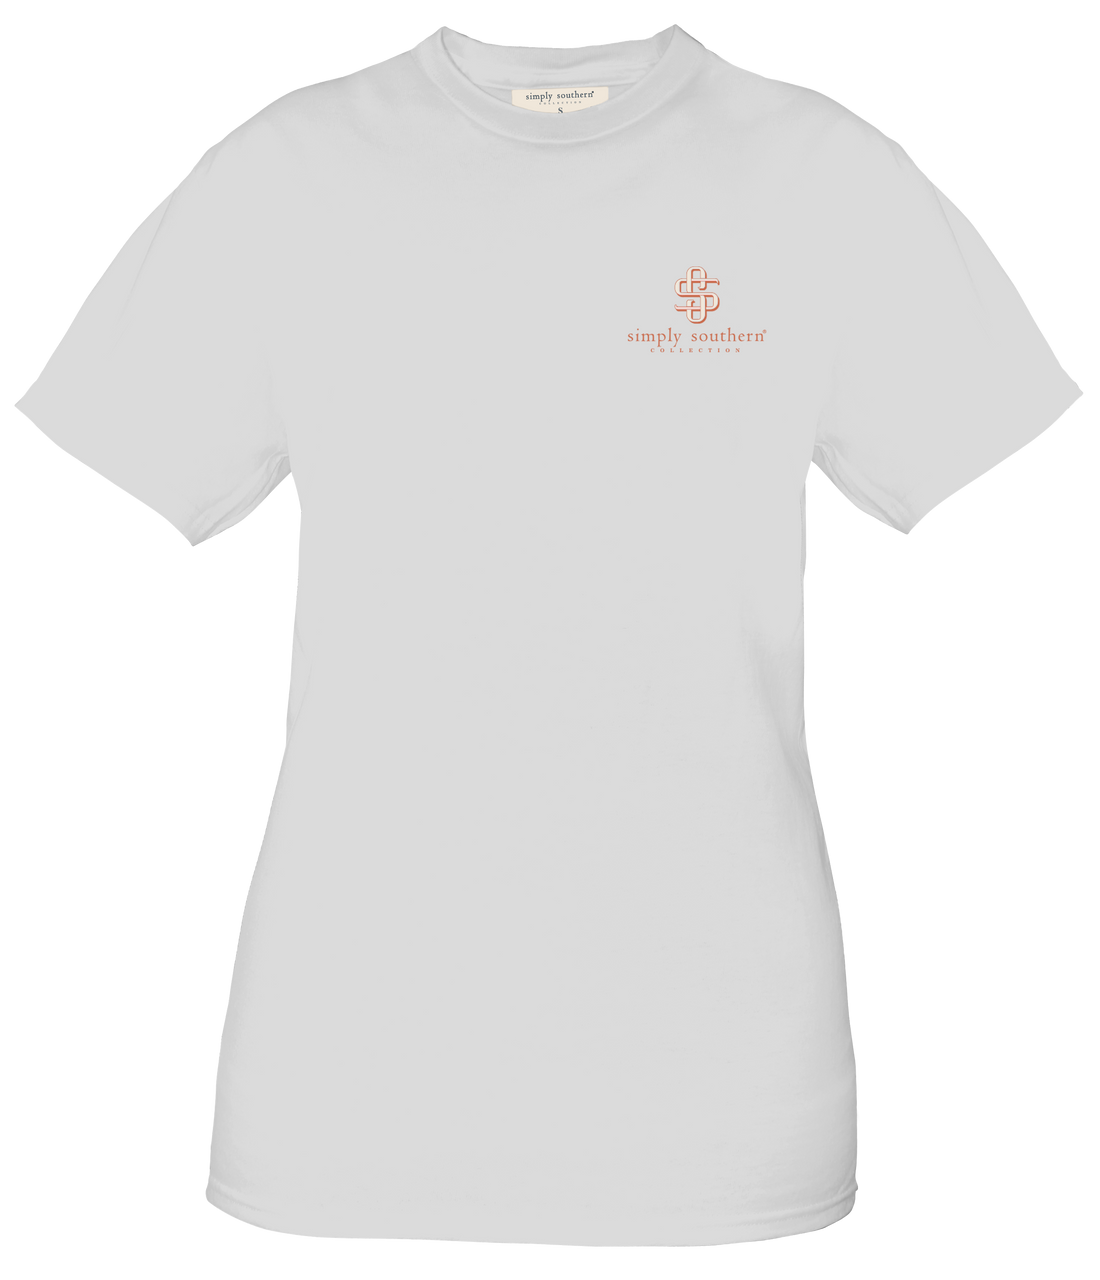 Simply Southern - Spirit Lead Me SS Tee - 2024